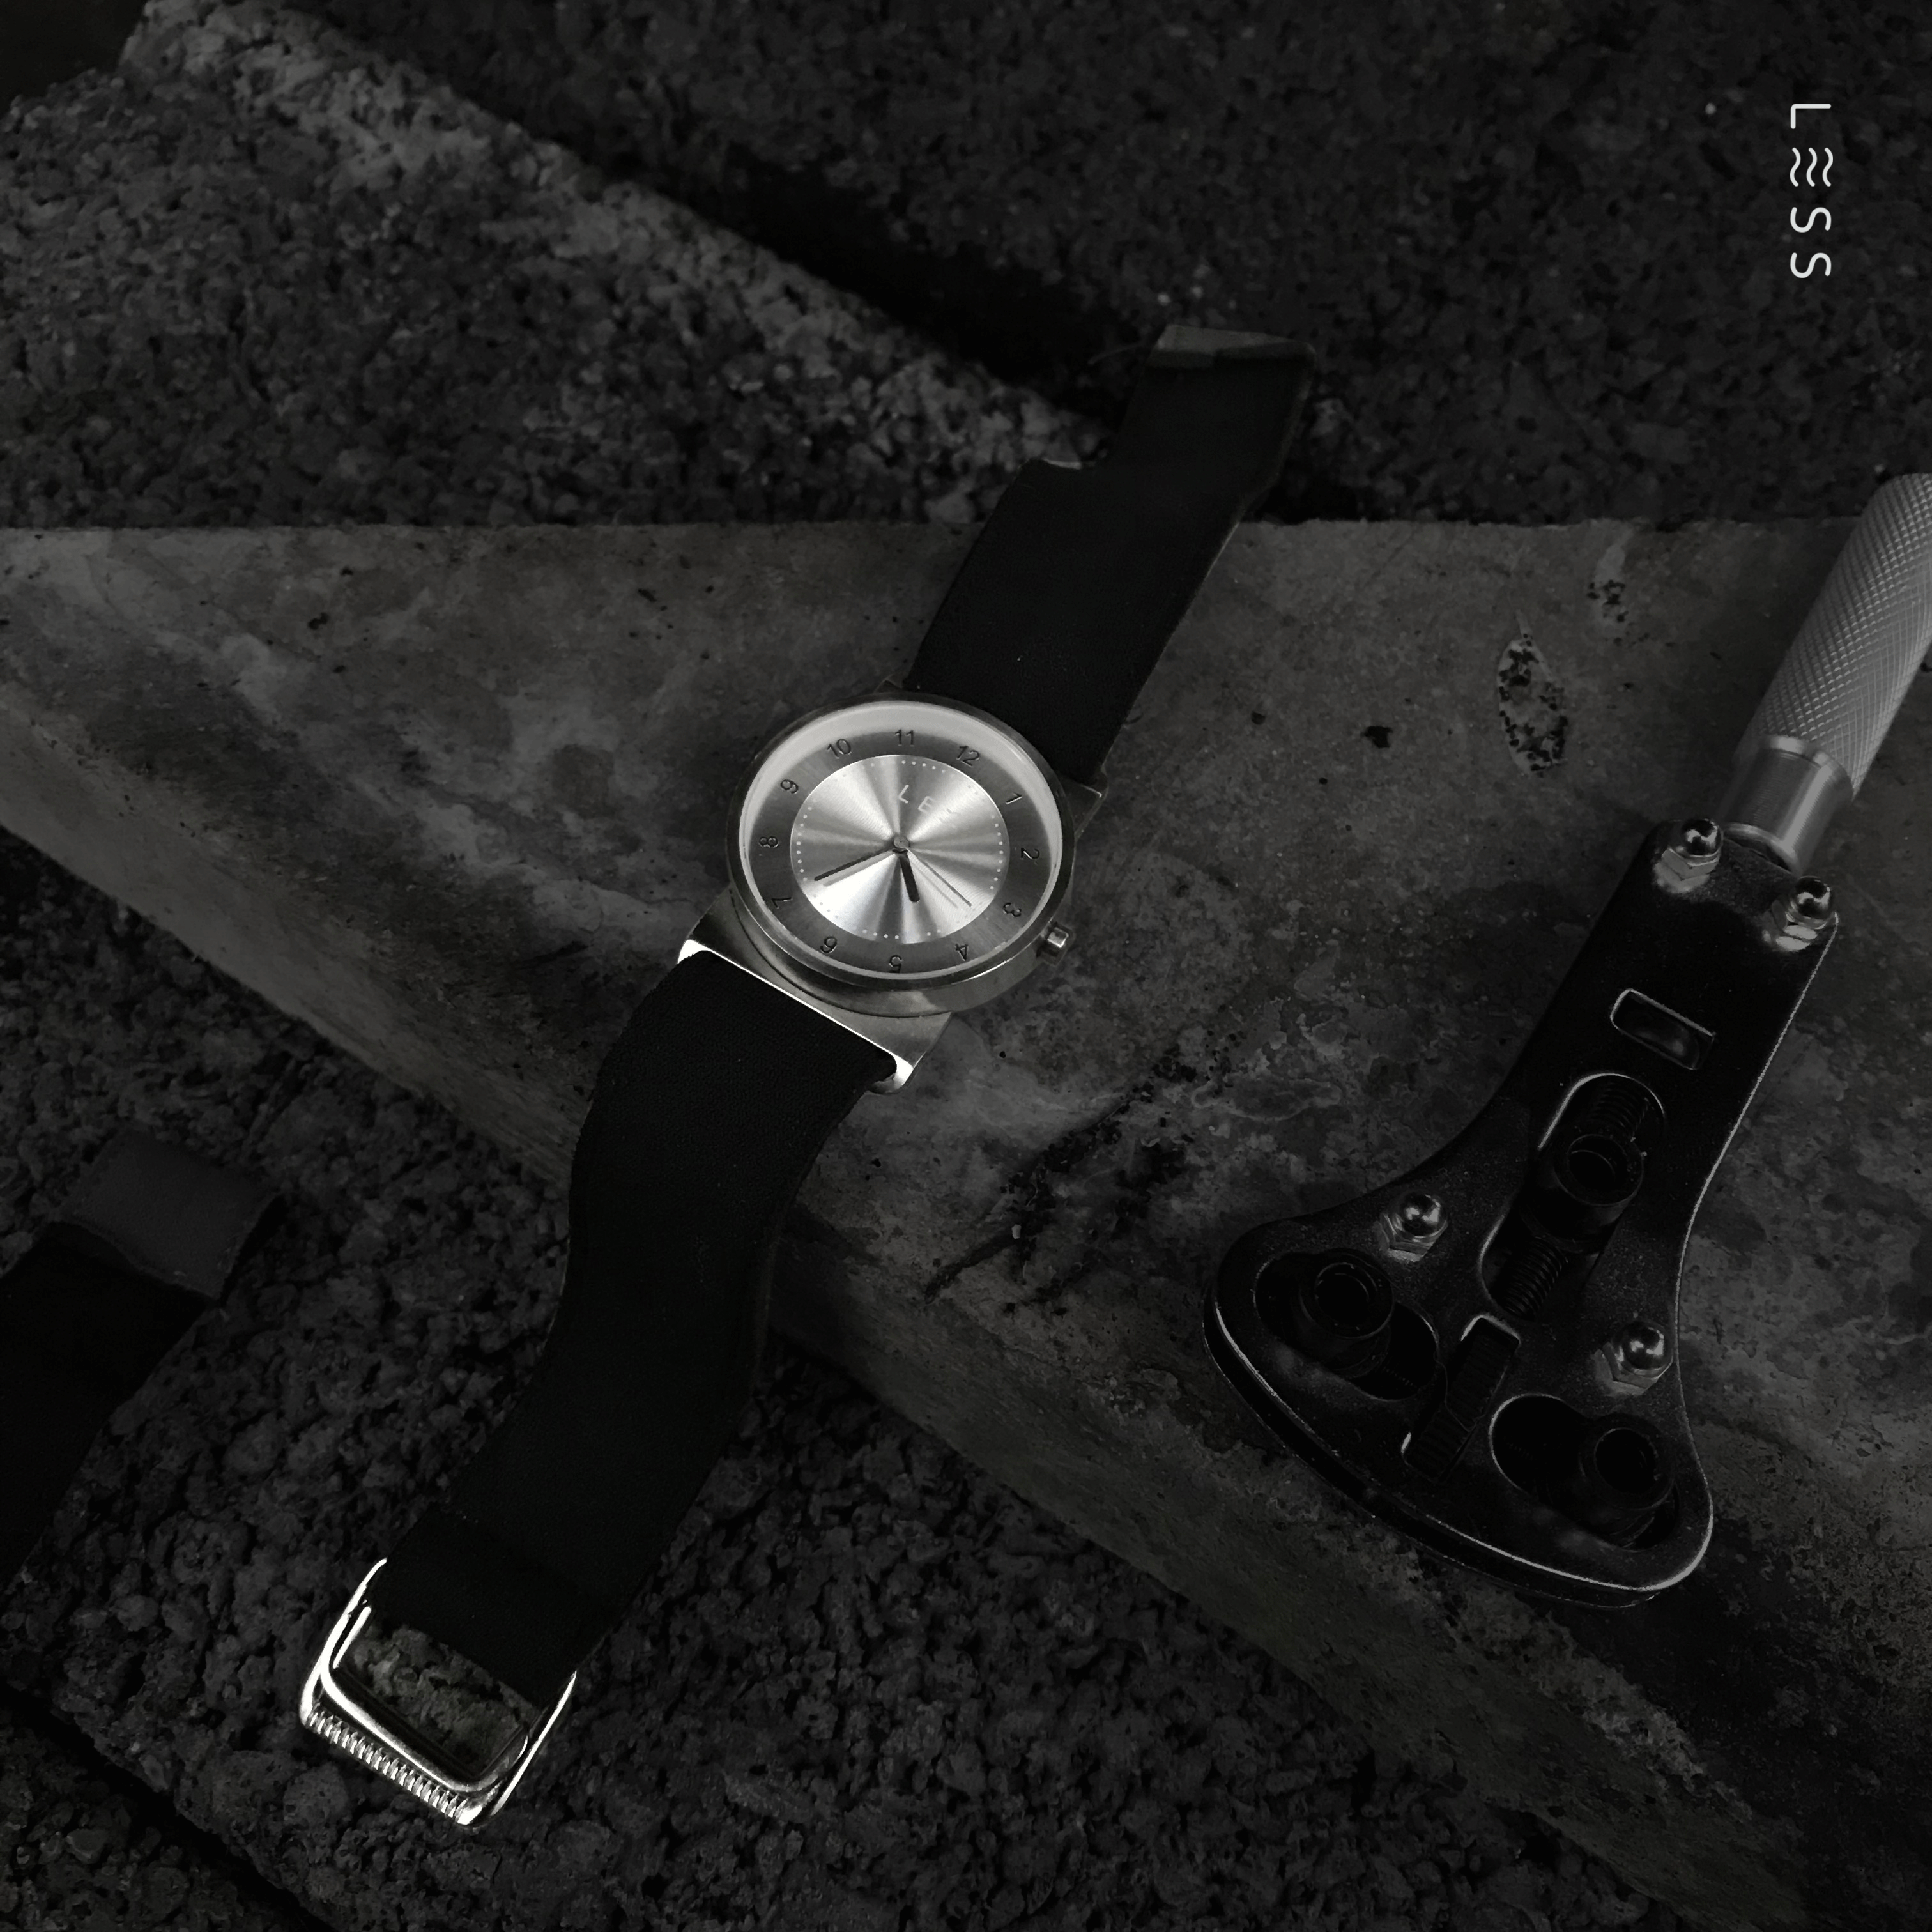 urban style silver eco watch on concrete